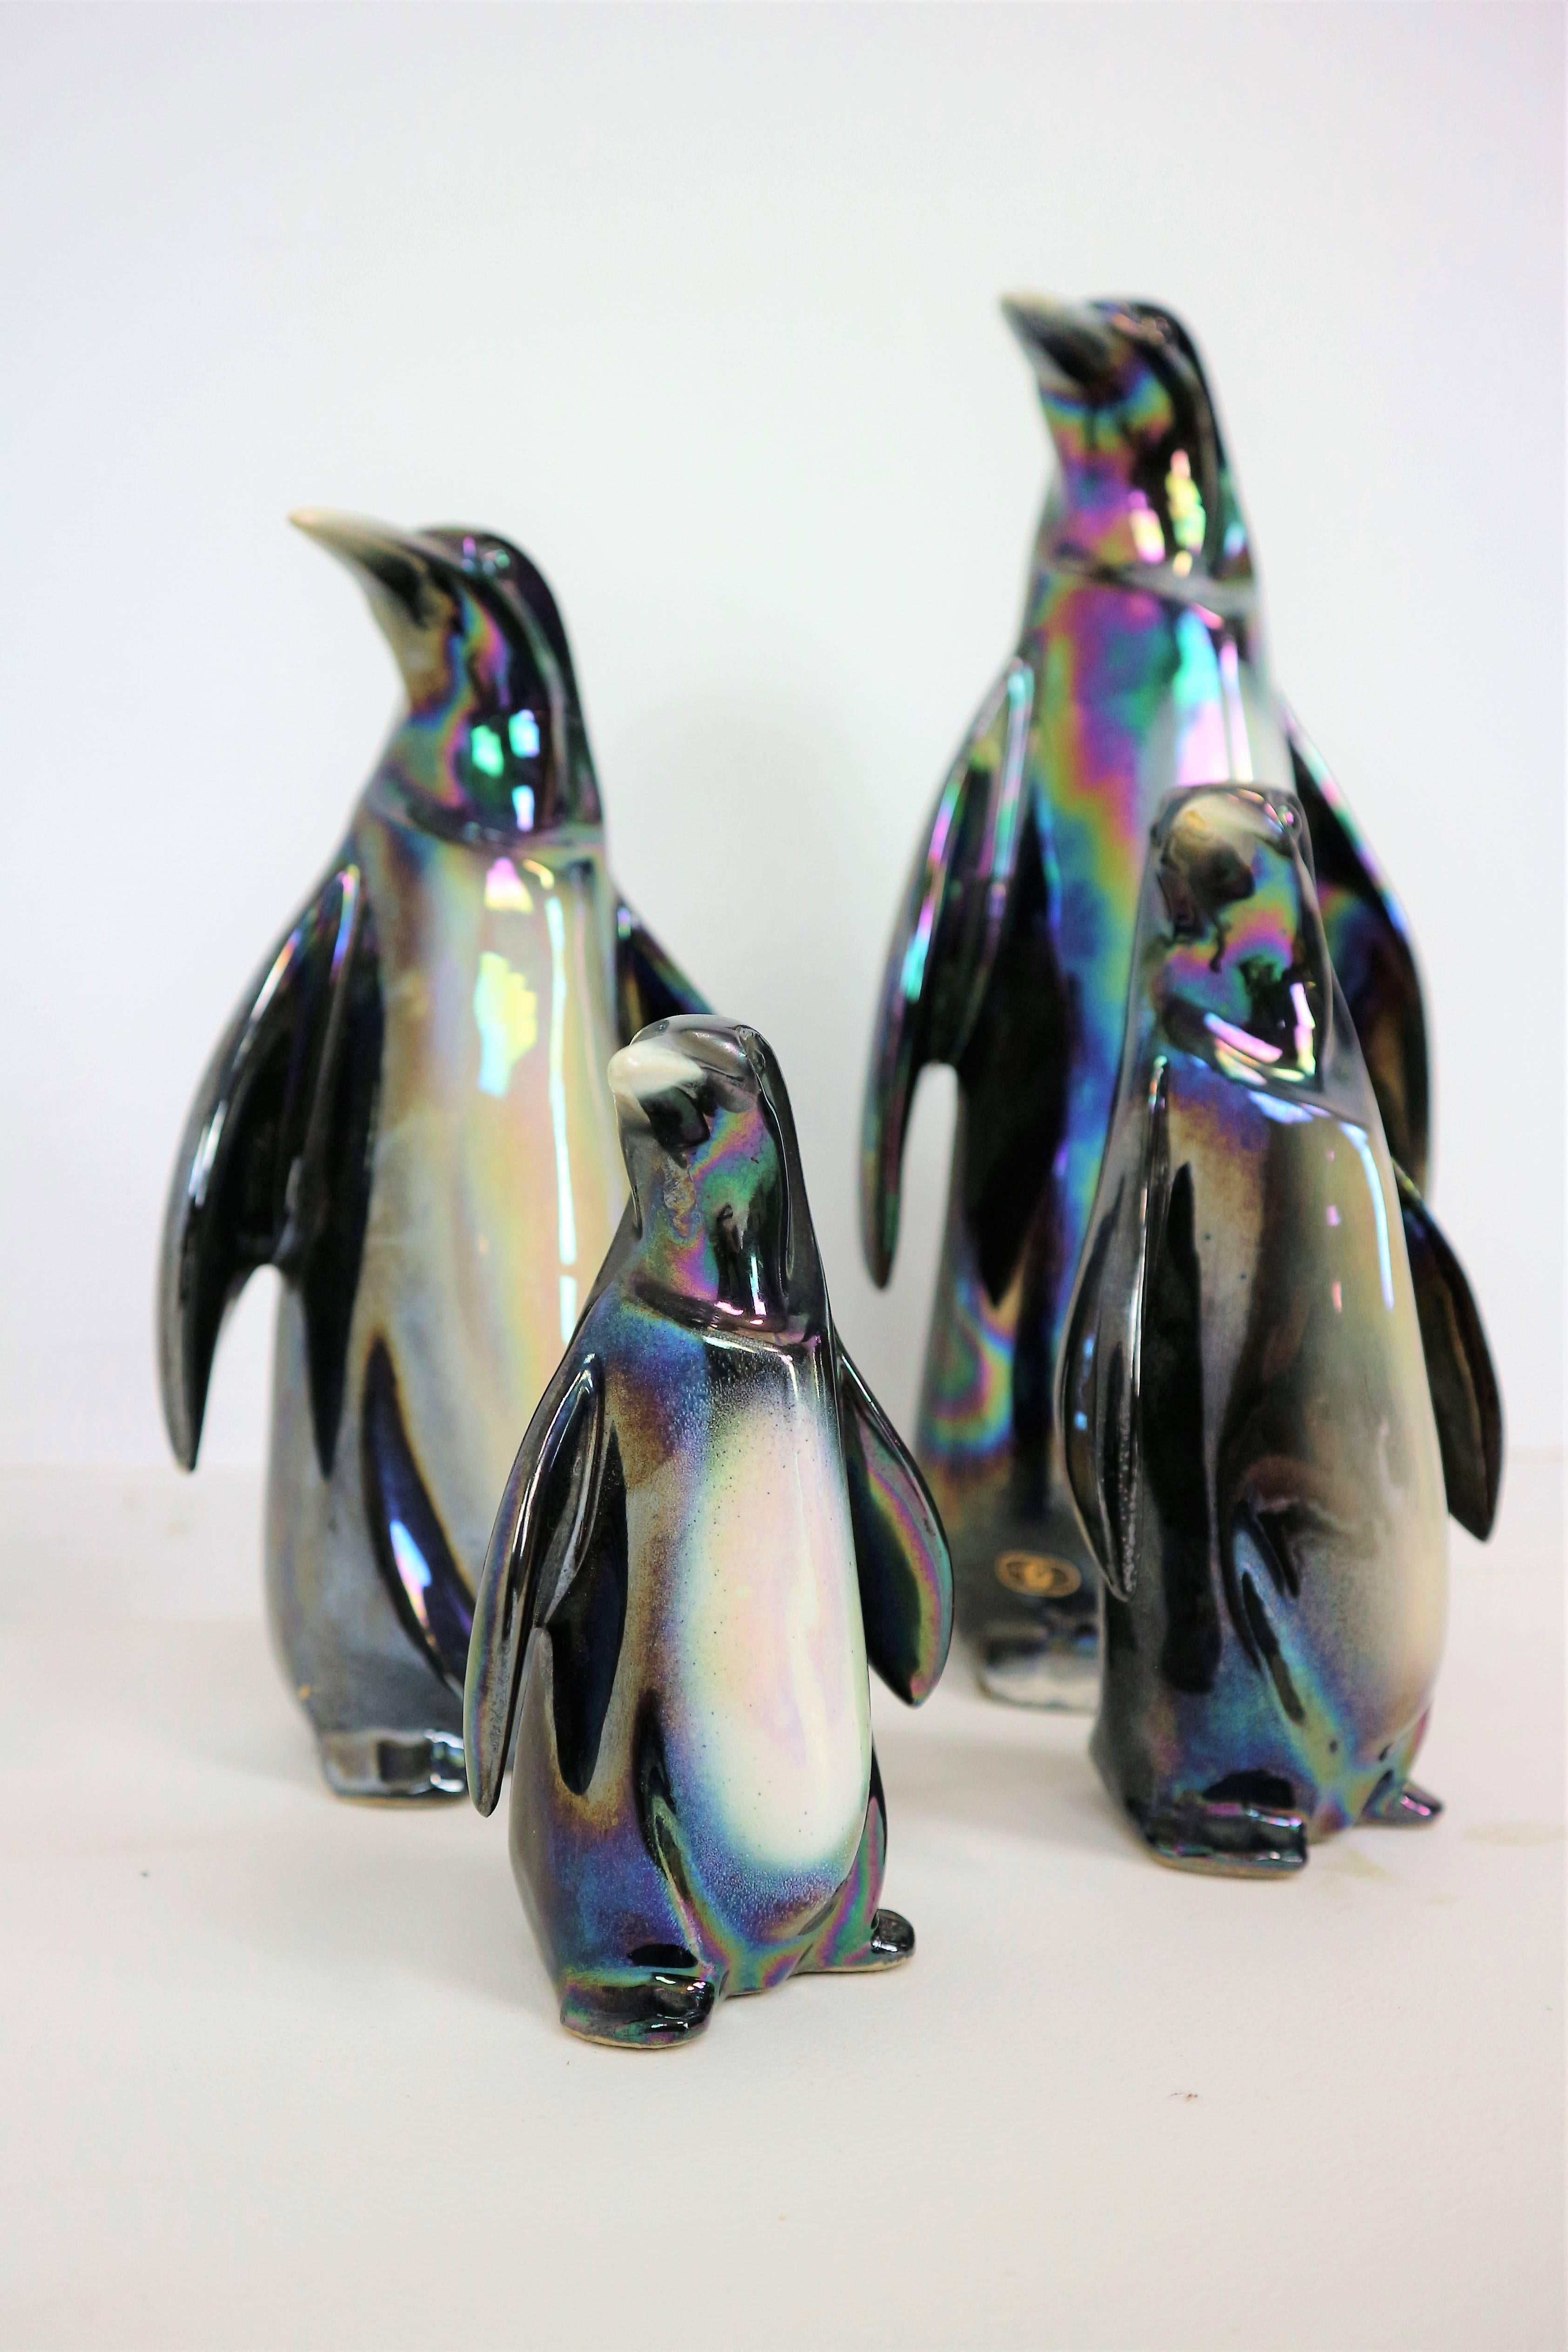 The set contains of four ceramic penguins, all in great condition.
The penguins are all market and numbered by the maker and make a beautiful and unique set together. Beautifully hand-painted and glazed with a pearl shine.
The heights are: